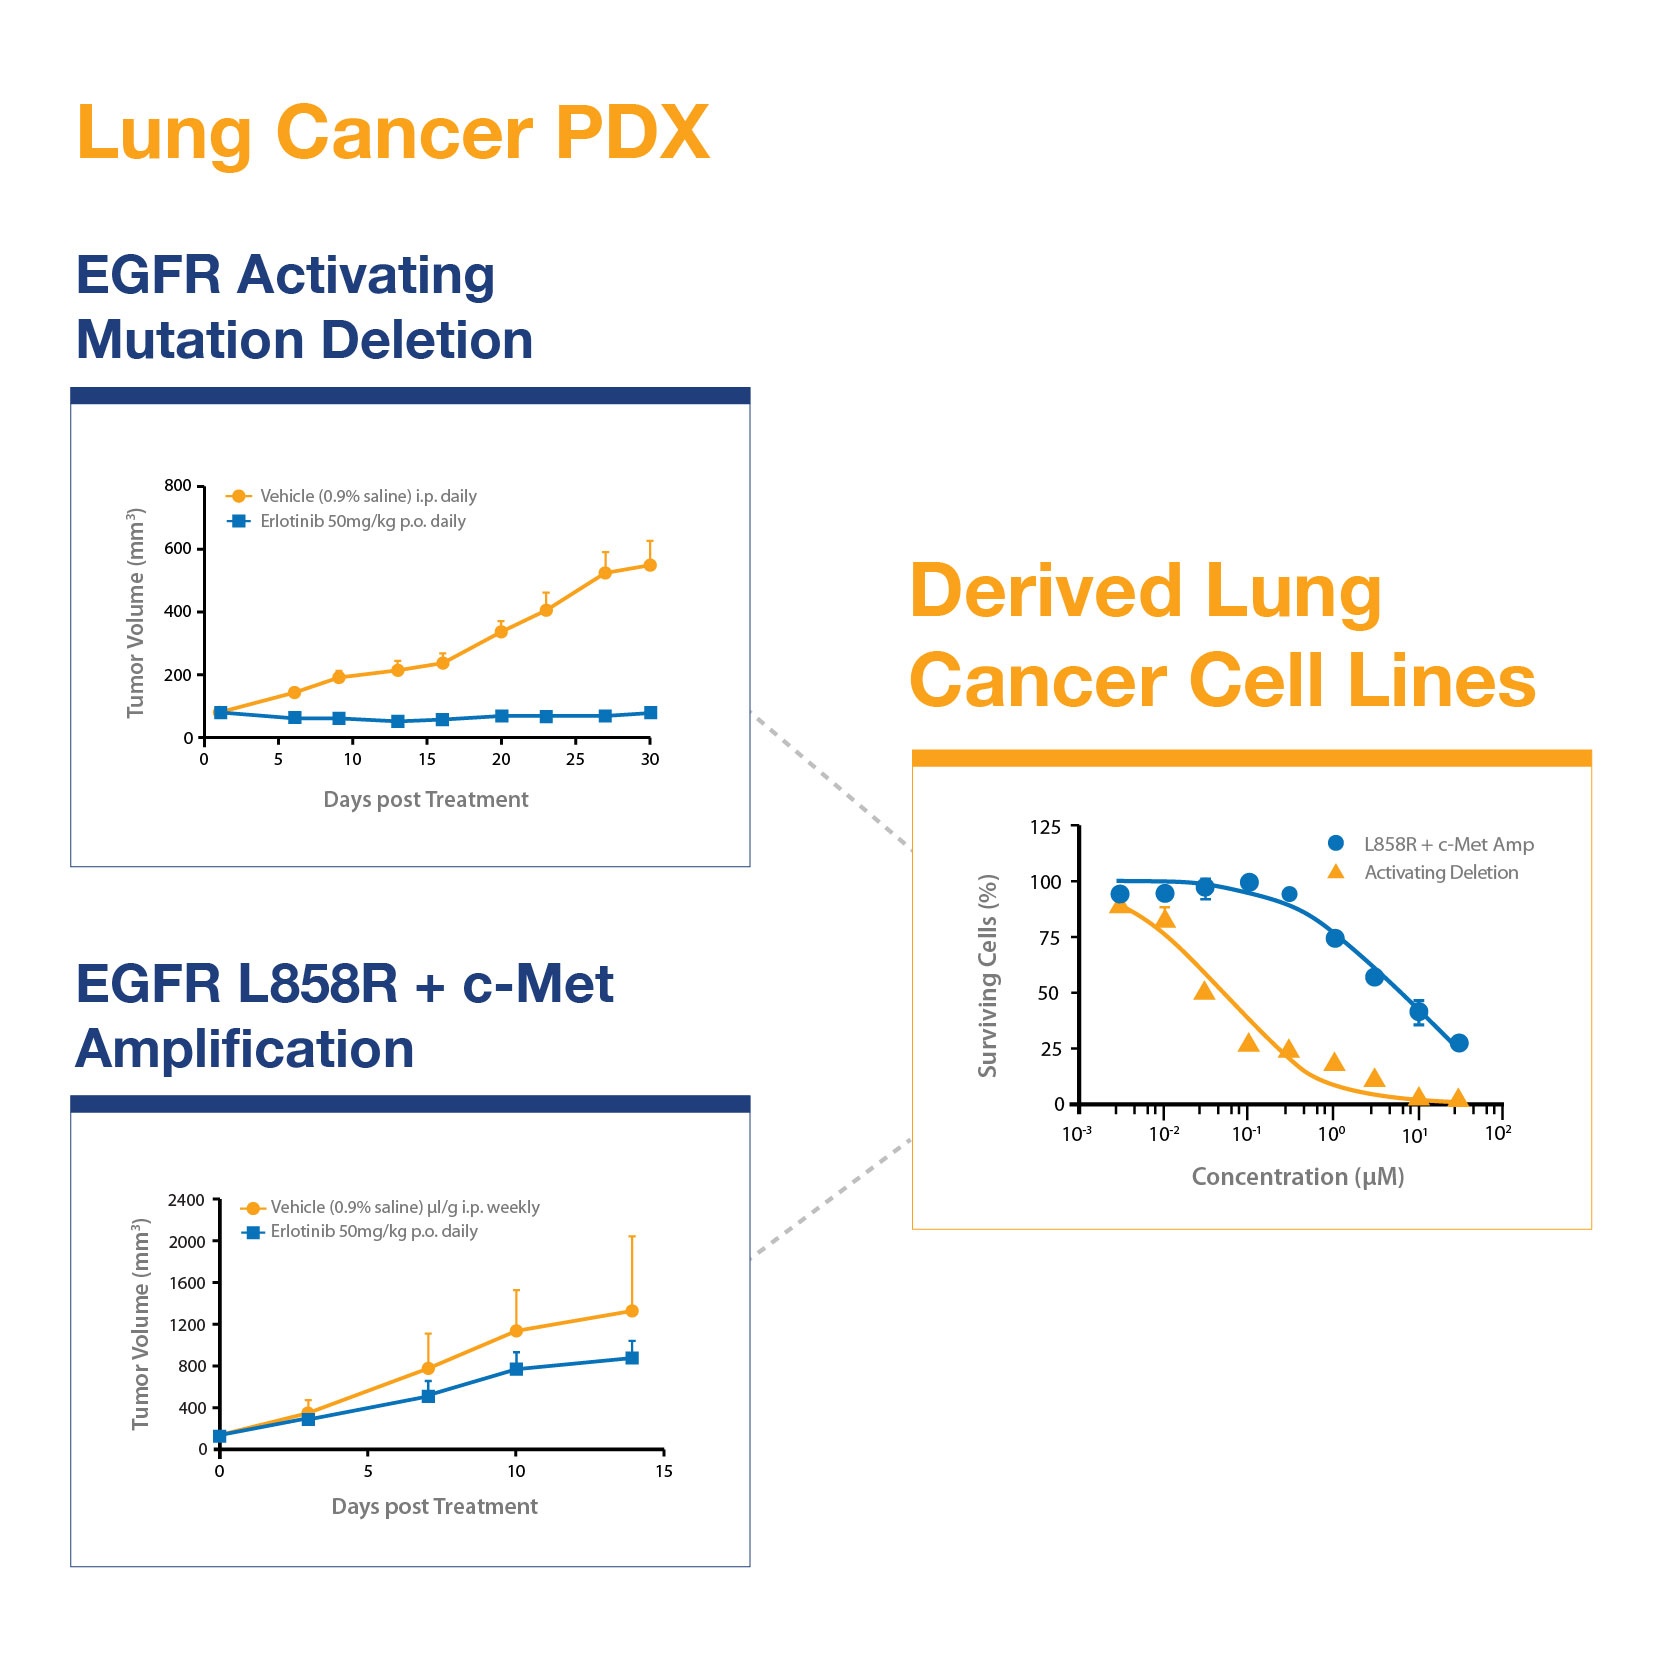 How Patient Derived Tumor Grafts (PDX) Accelerate Early Drug Development